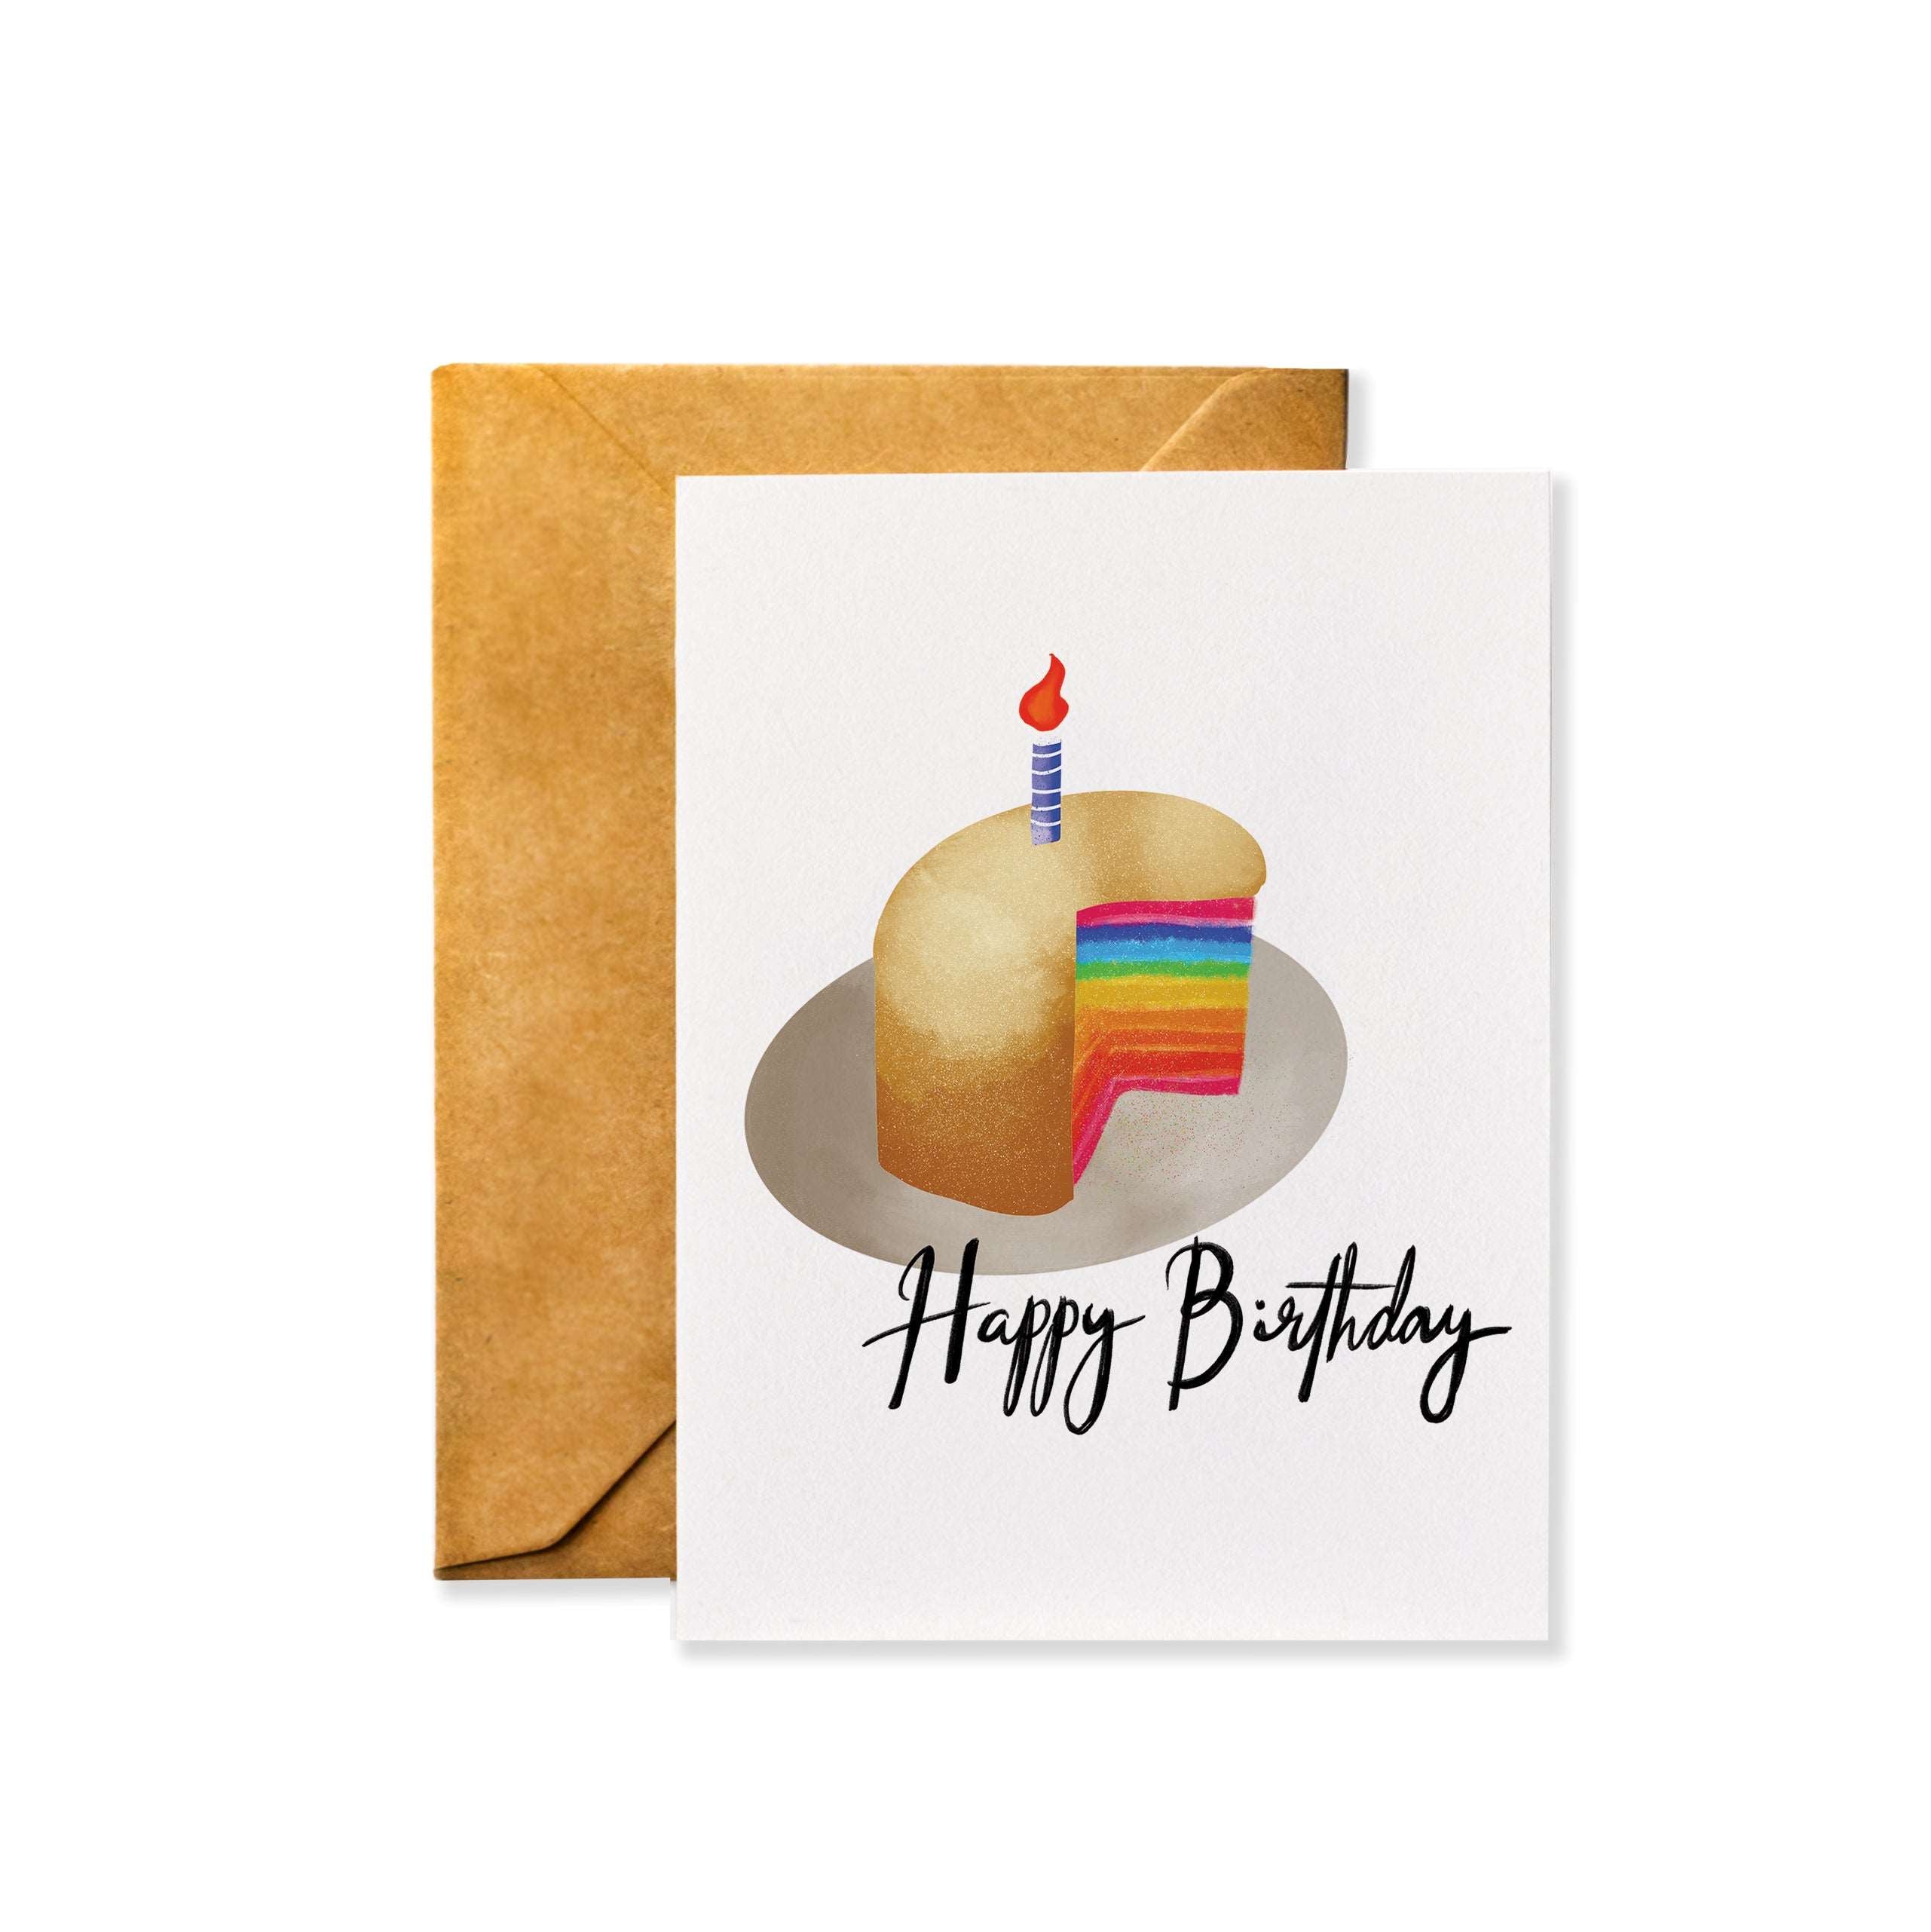 Birthday Cards - Buy Birthday Greeting Cards Online In India - Giftpopup